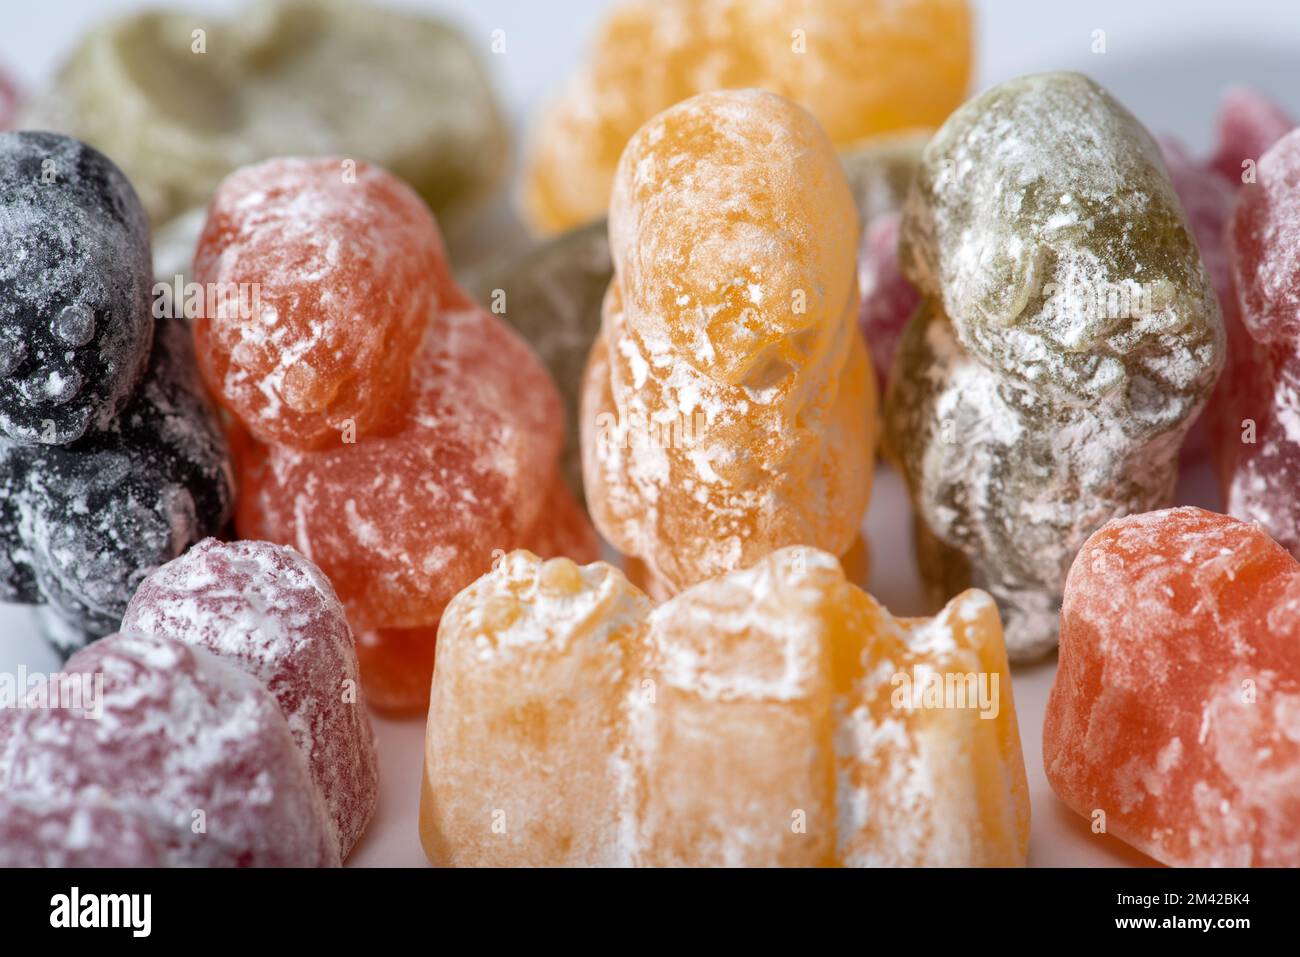 Jelly Babies Sweets Confectionary UK Stockfoto